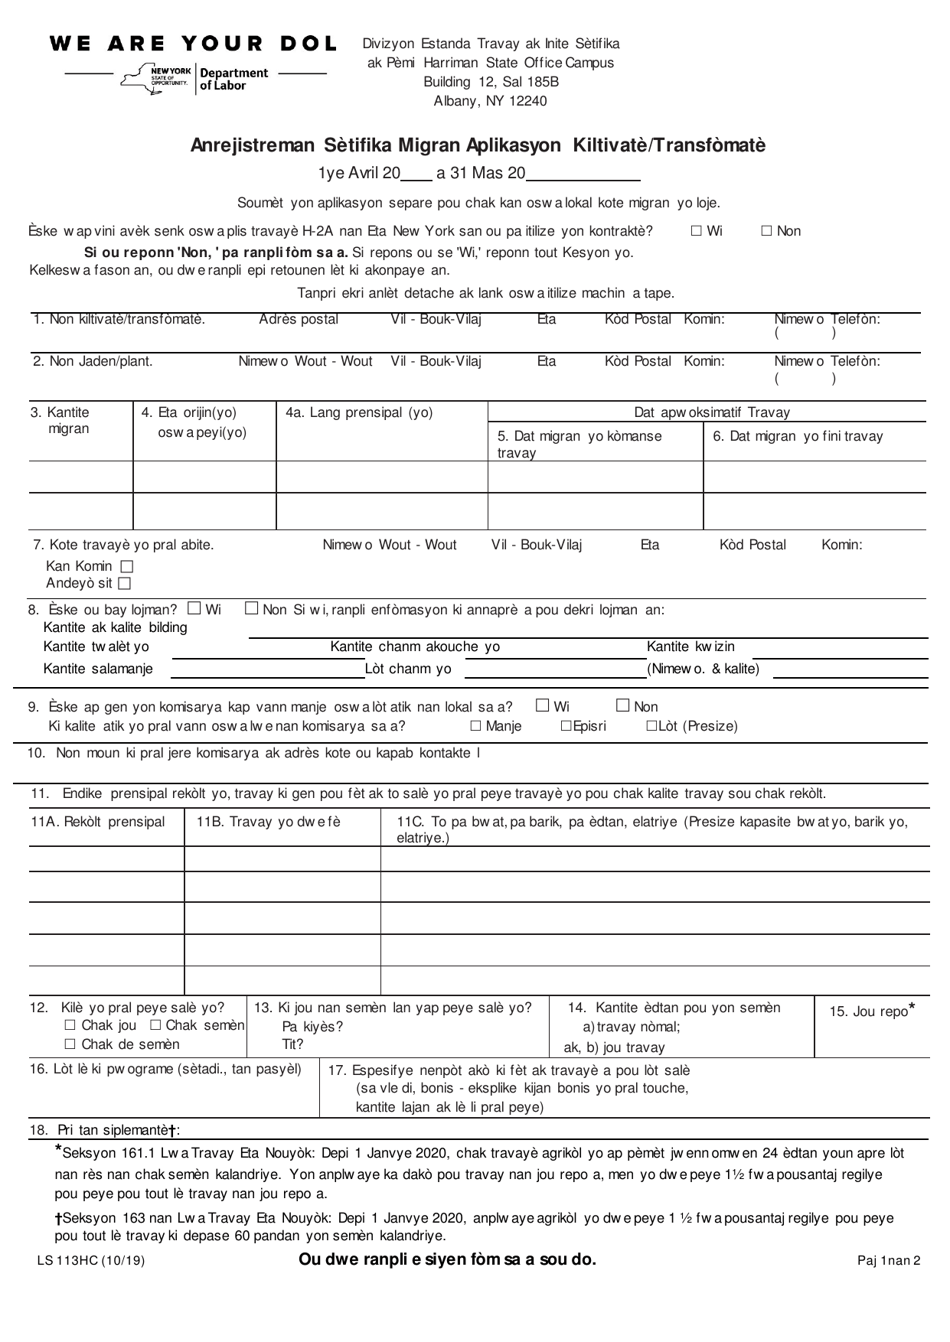 Form LS113HC Application for Growers / Processor Certificate of Migrant Registration - New York (Haitian Creole), Page 1